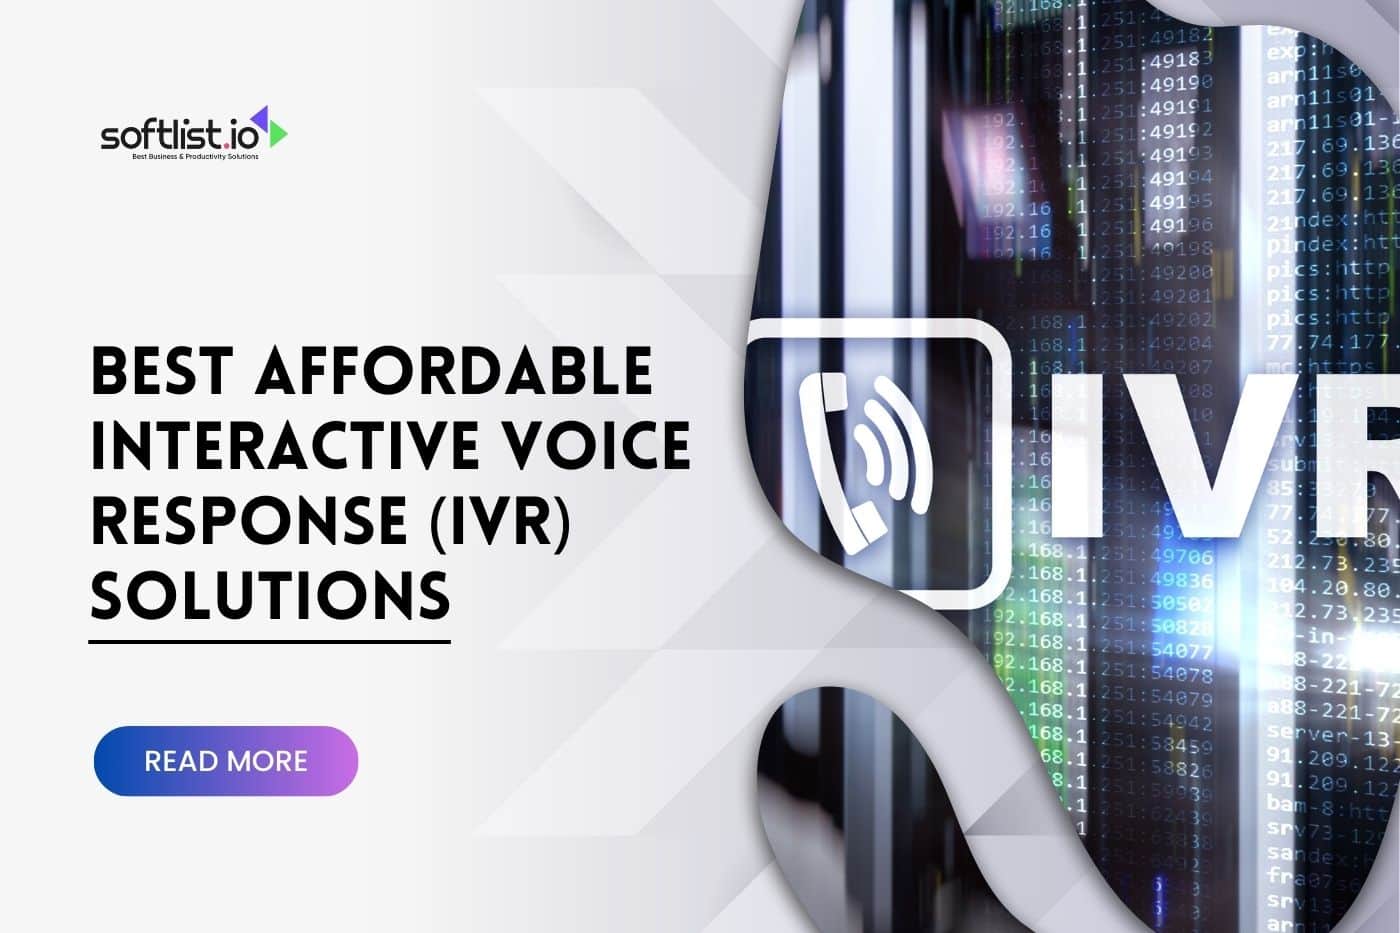 Best Affordable Interactive Voice Response (IVR) Solutions